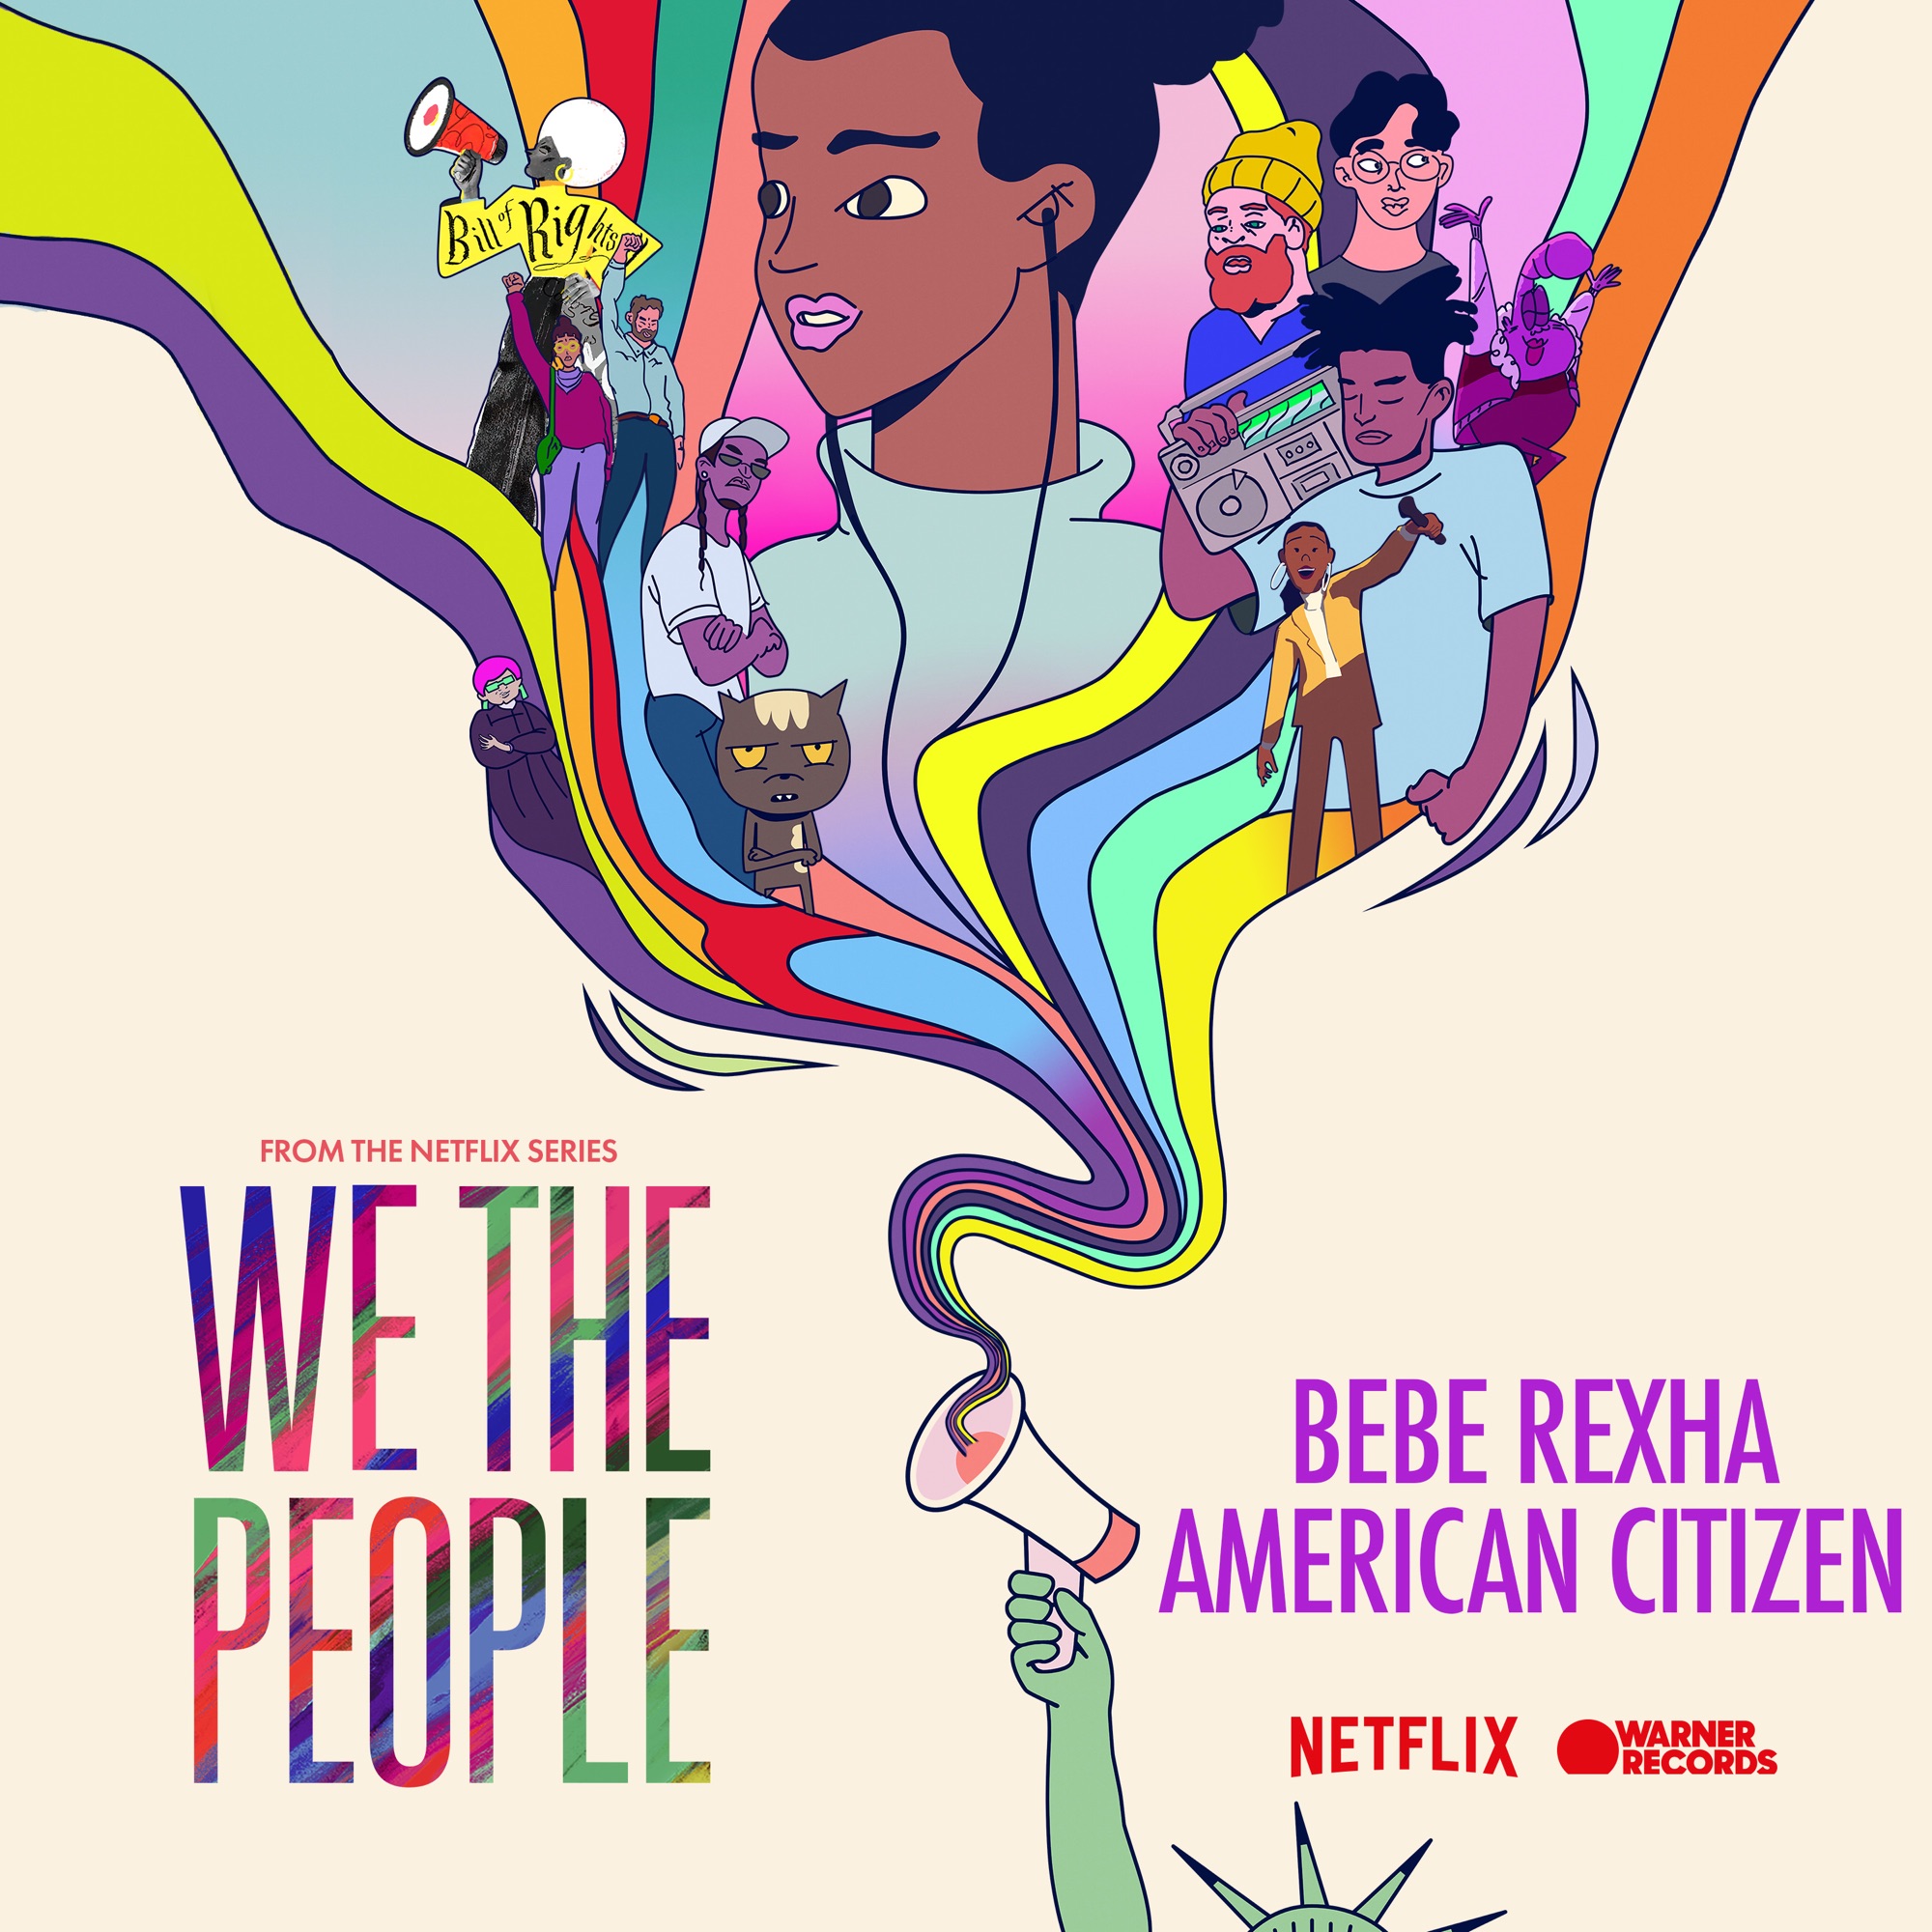 Bebe Rexha - American Citizen (from the Netflix Series "We The People") - Single